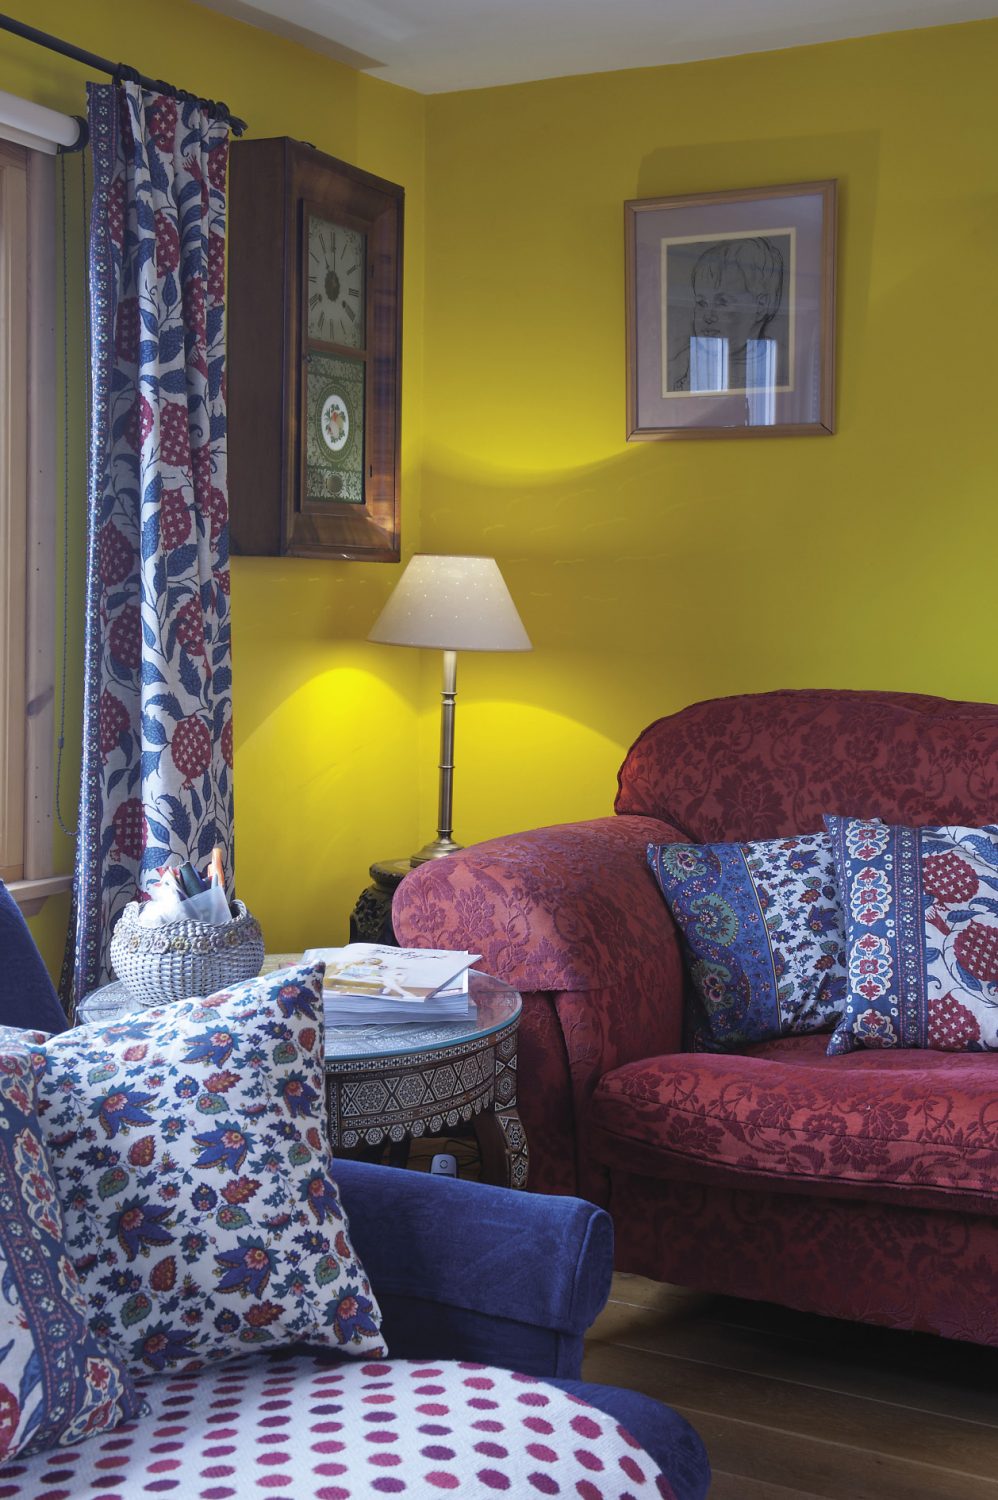 In the sitting room bookshelves are crammed with art and design books. The three sofas are draped with woven woollen throws and an assortment of cushions including some that are covered in a heavy cotton printed with a pomegranate motif, a fabric that Fiona found at Hoopers in Tunbridge Wells